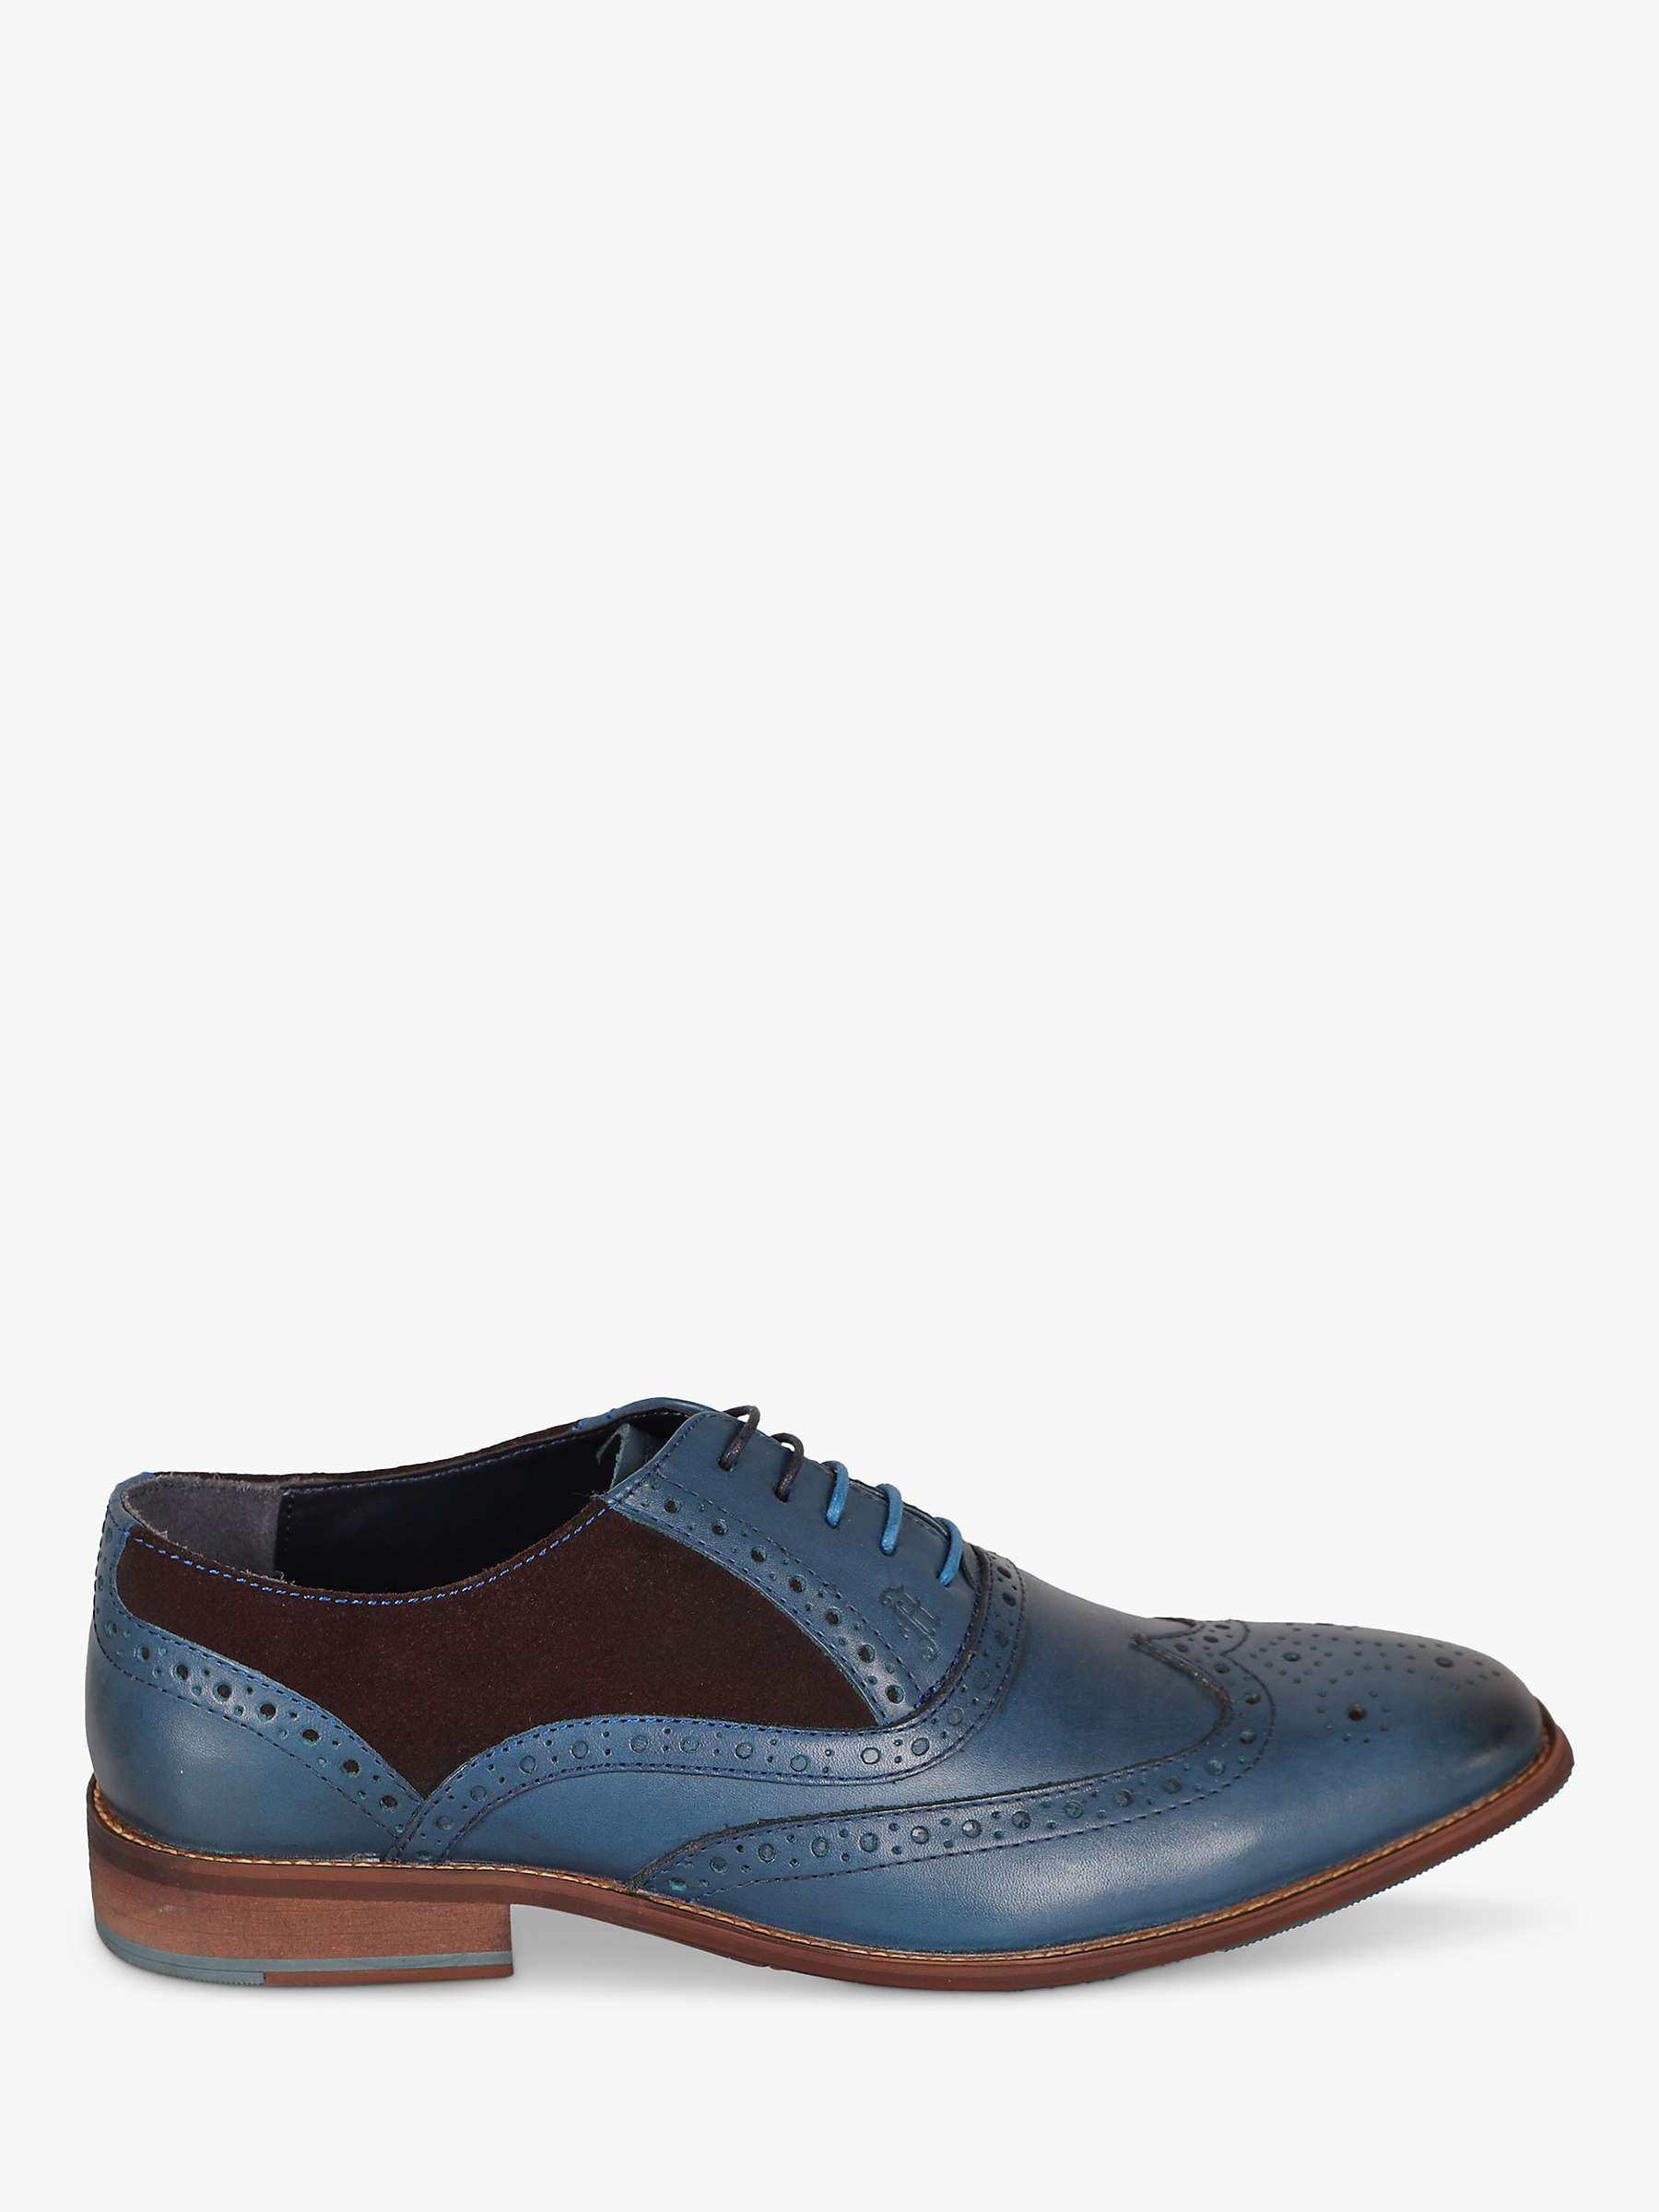 Buy Silver Street London Amen Collection Waterford Leather Brogues, Blue/Brown Online at johnlewis.com